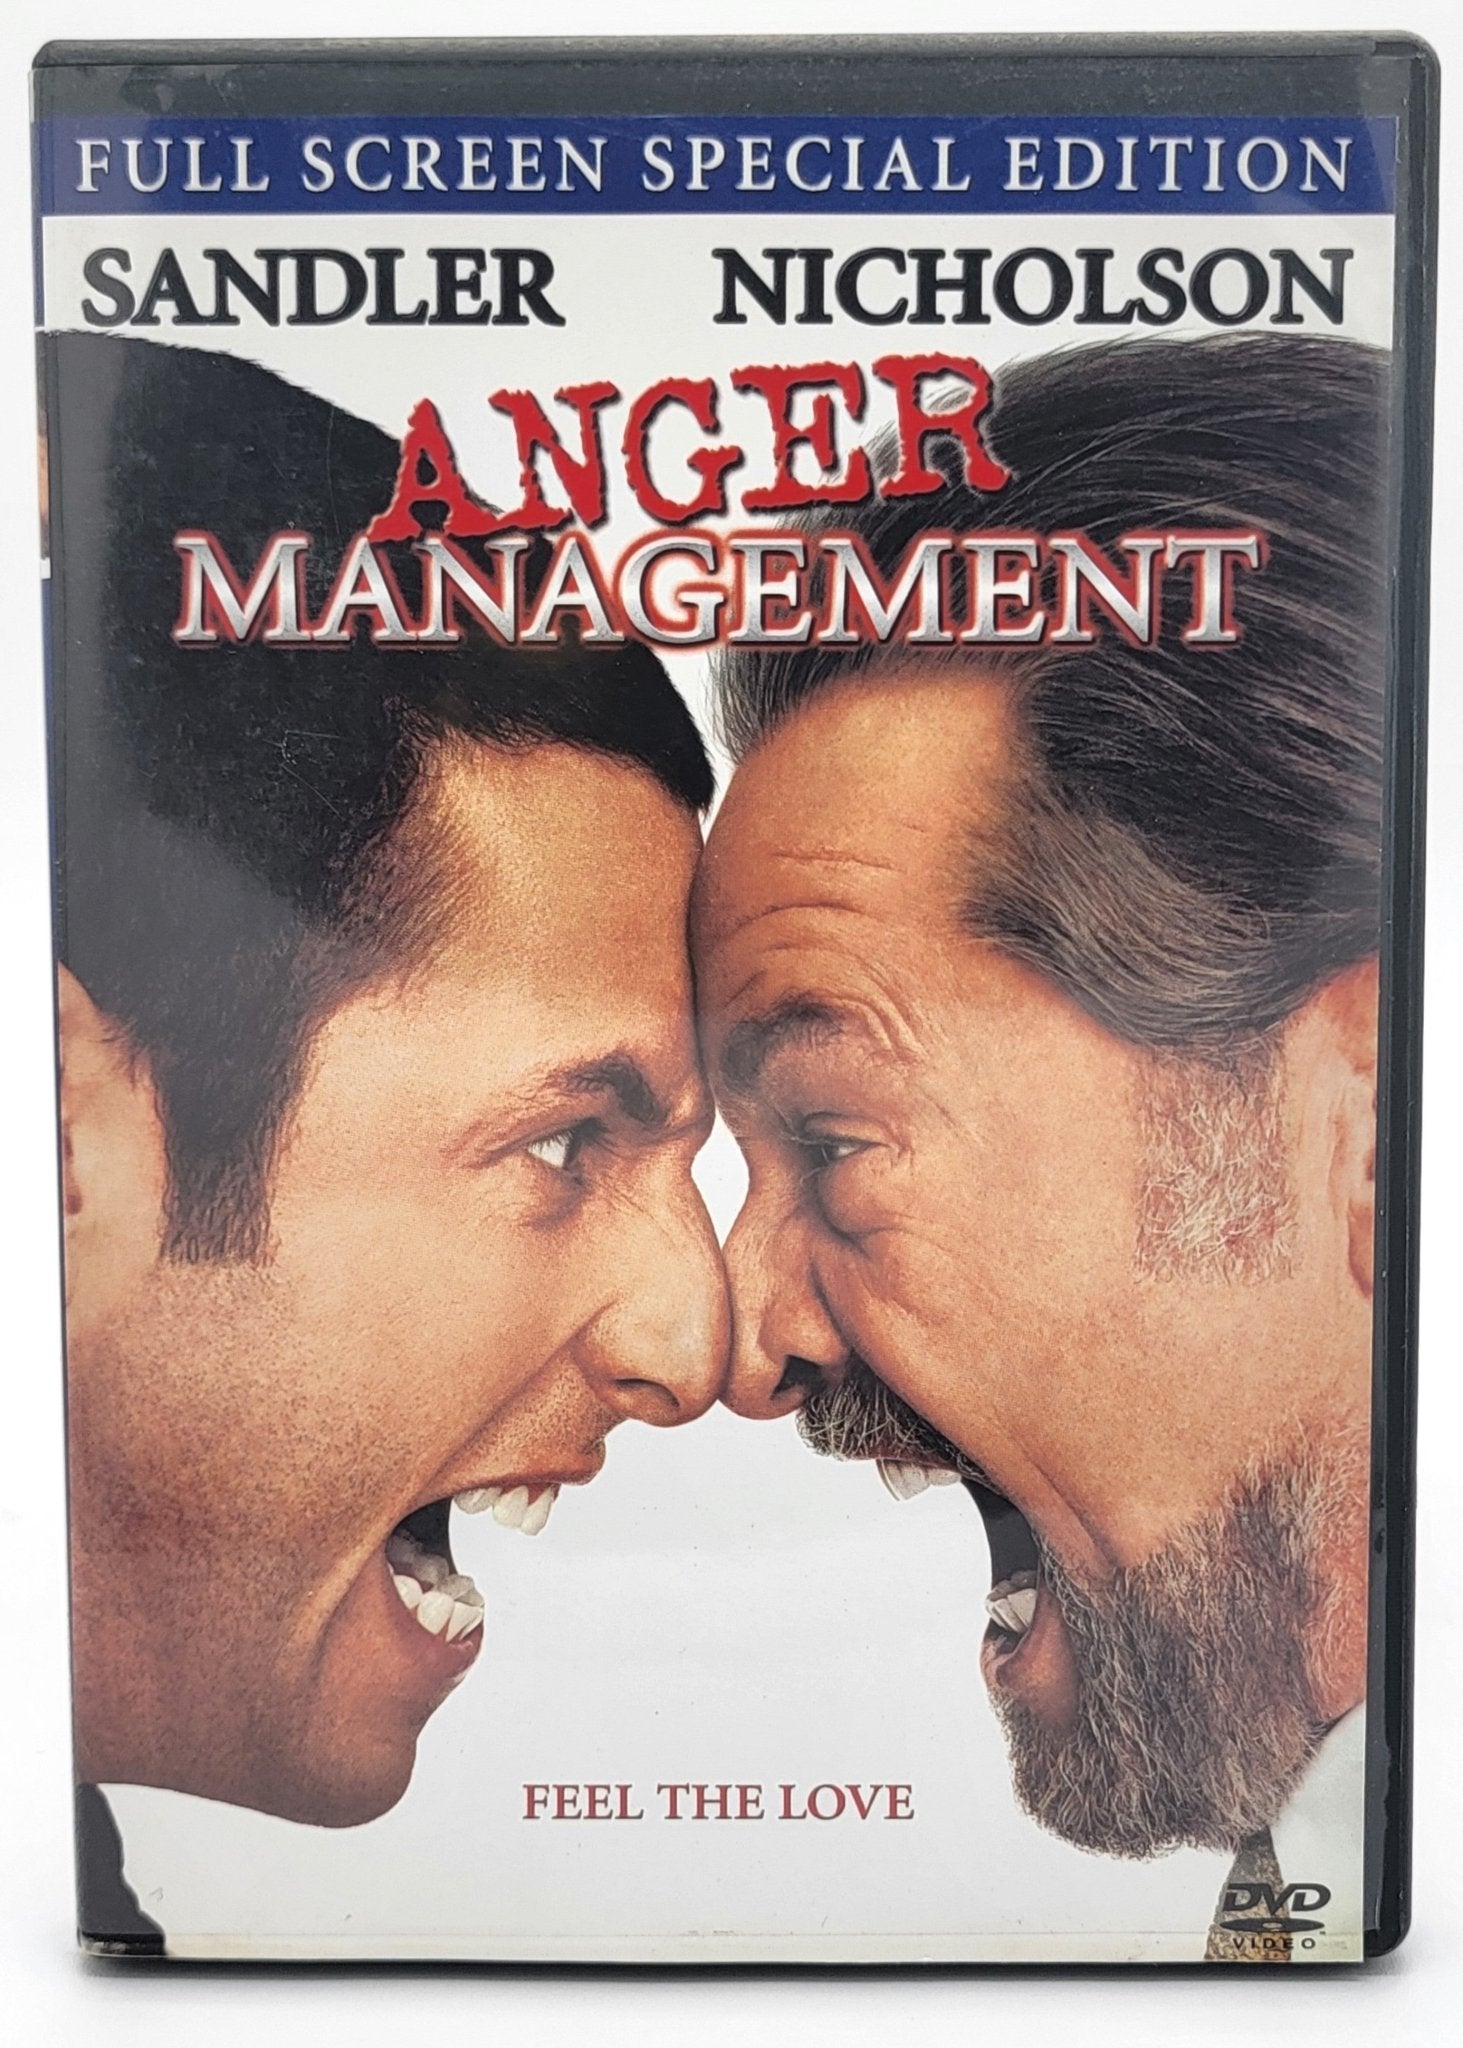 Columbia Pictures - Anger Management | DVD | Full Screen Special Edition - DVD - Steady Bunny Shop